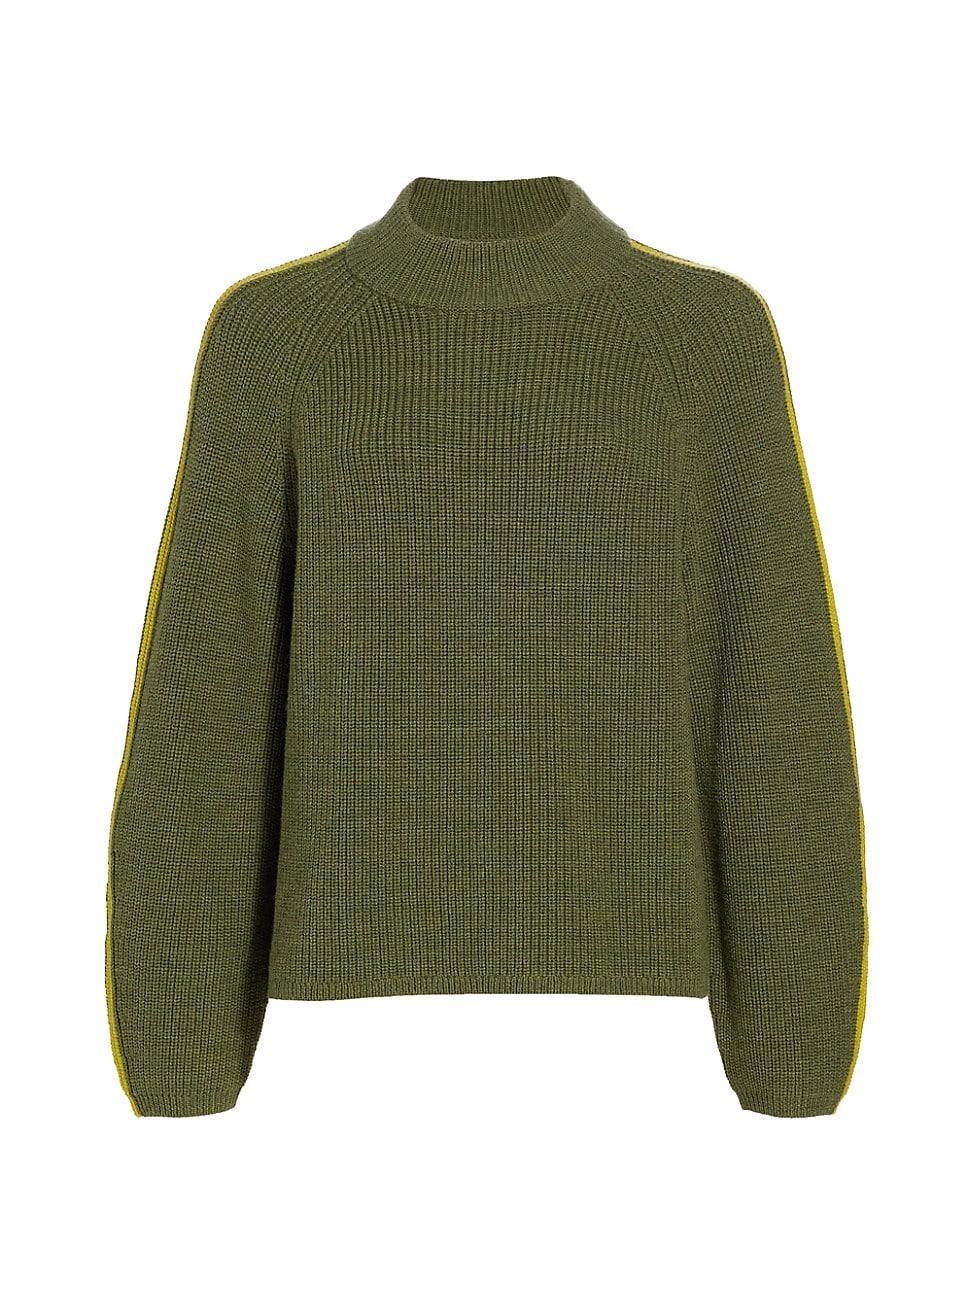 Womens Teagan Wool-Blend Sweater Product Image